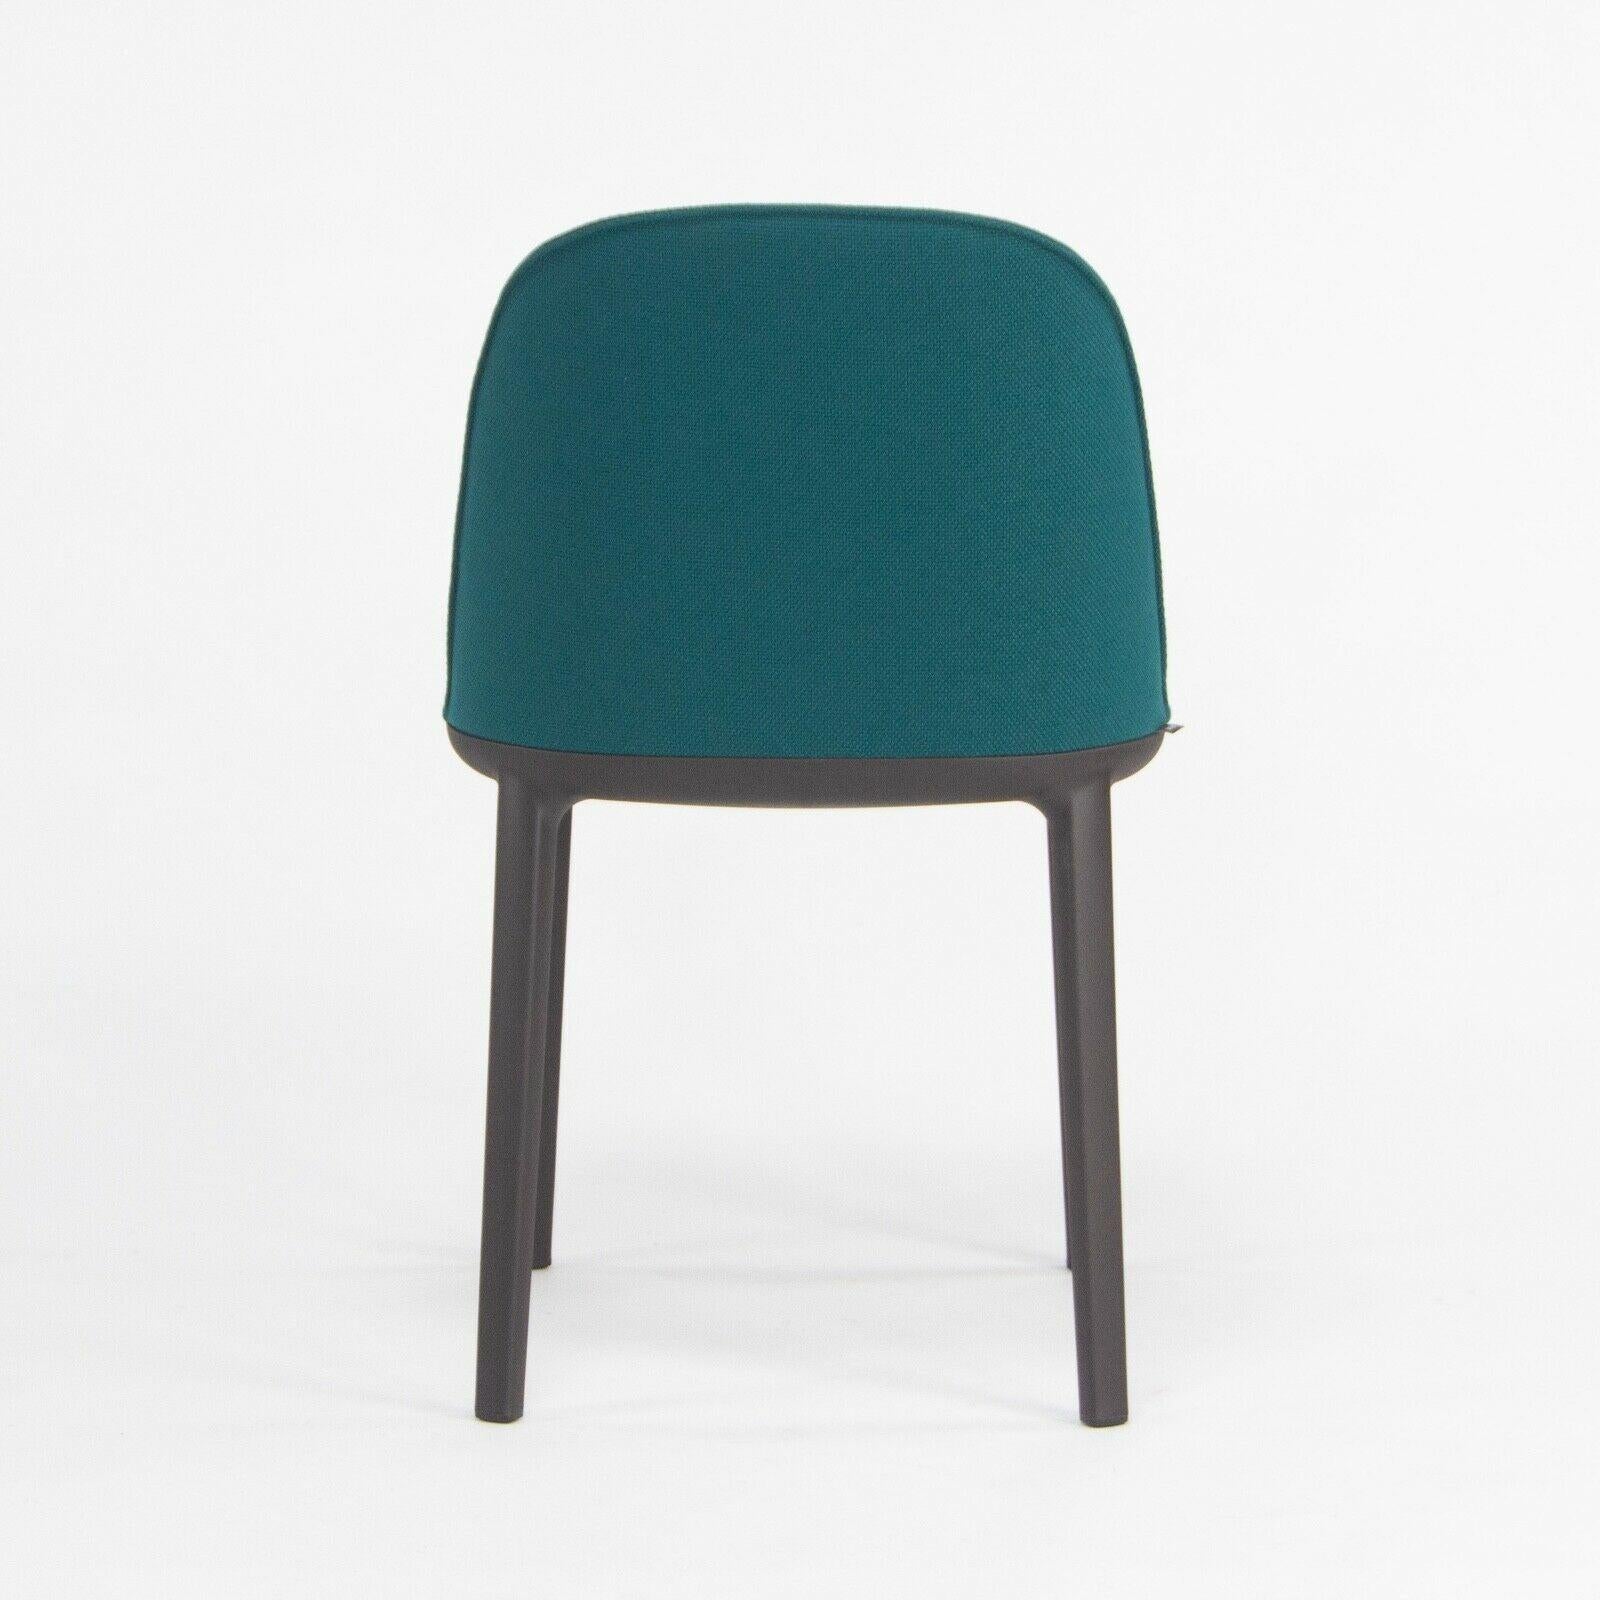 Contemporary 2019 Vitra Softshell Side Chair w/ Teal Blue Fabric by Ronan & Erwan Bouroullec For Sale